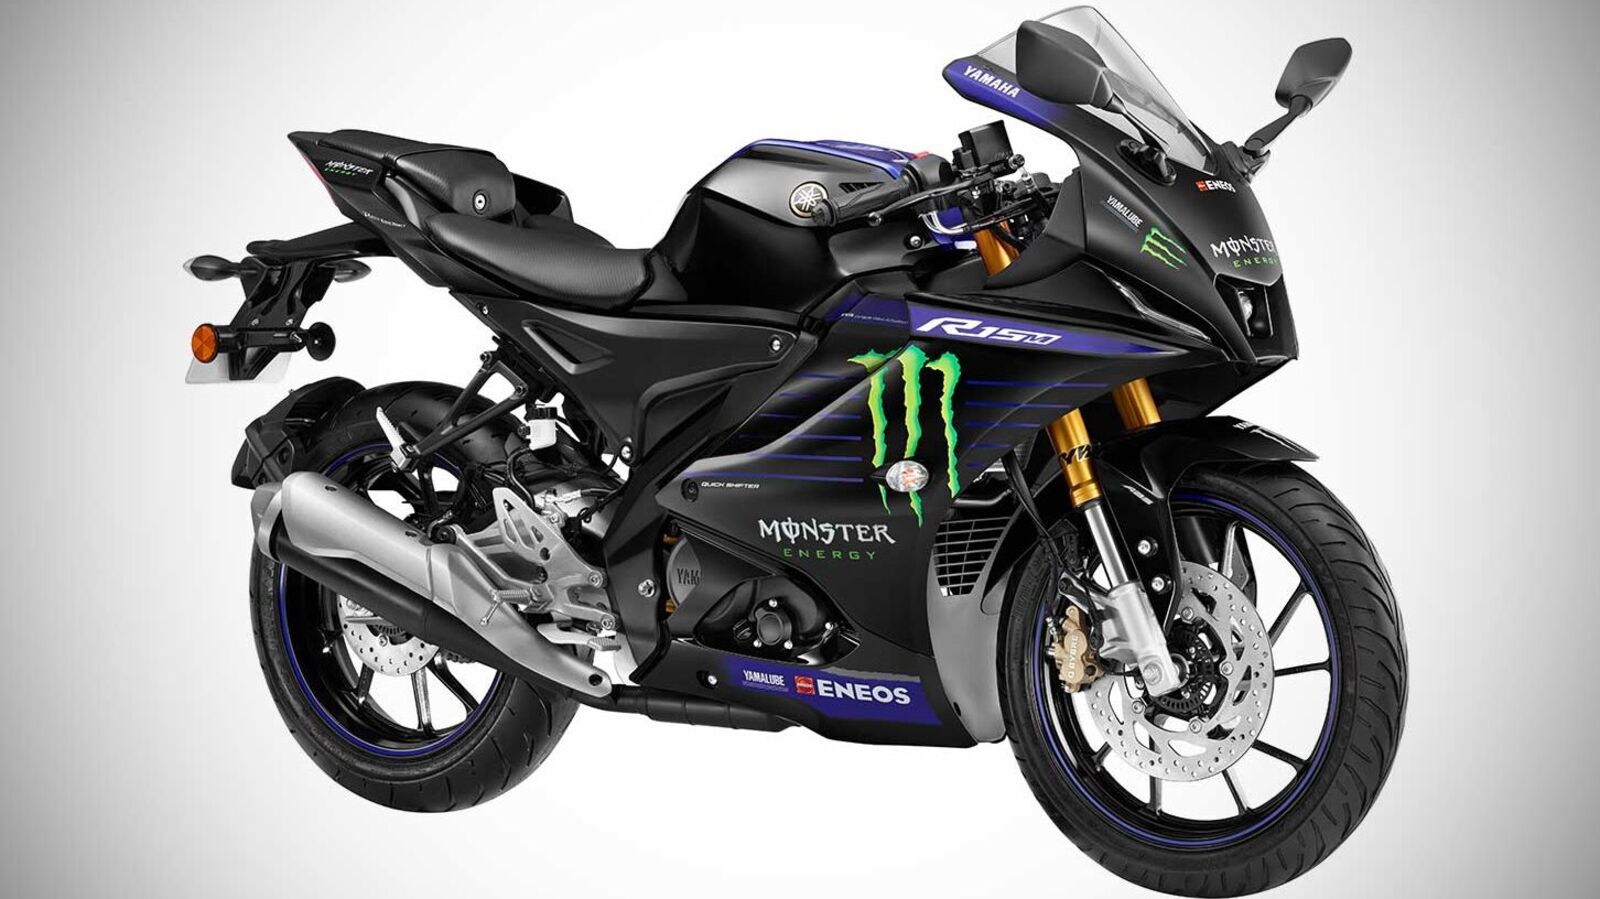 Yamaha YZF-R15 V4 MotoGP edition gets sold out in India | HT Auto